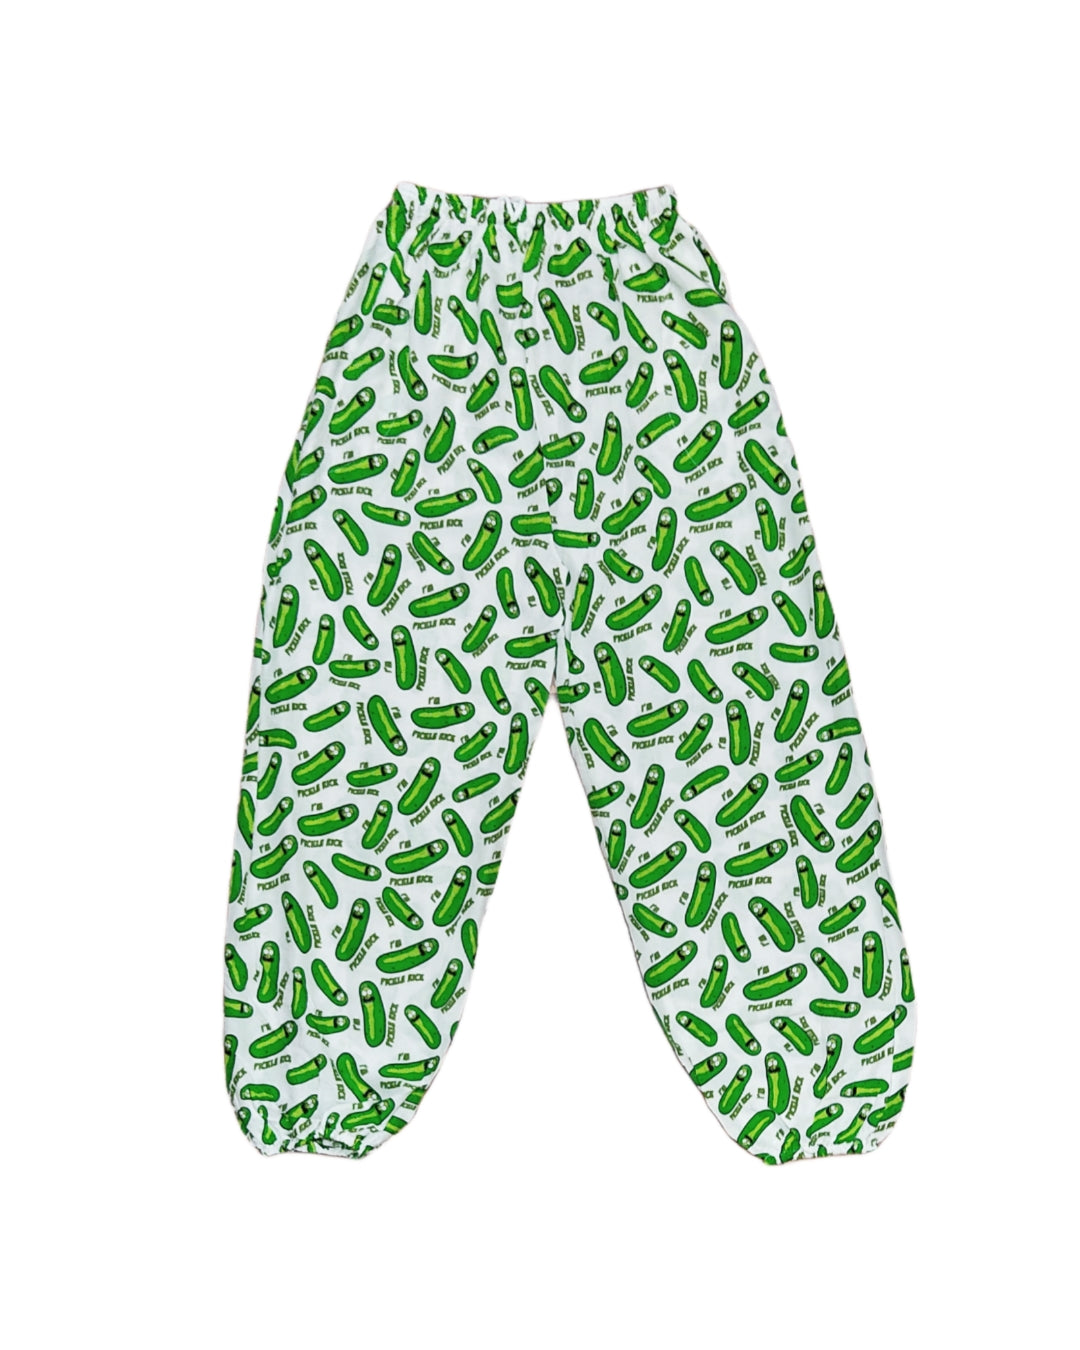 Pickle Rick All Over White Jammies